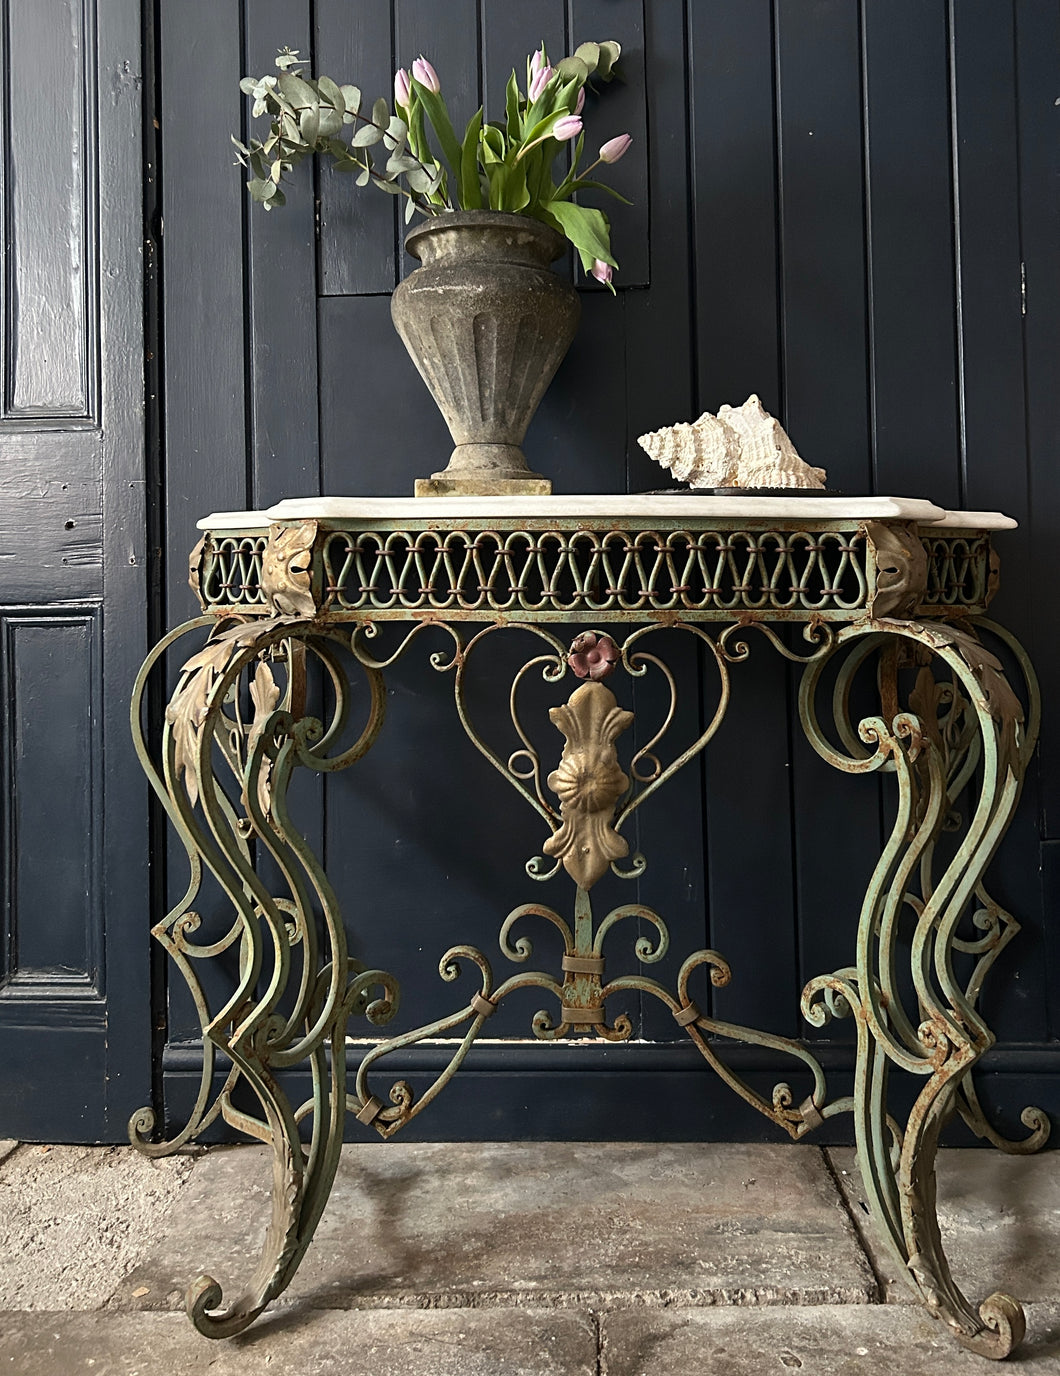 19th Century French antique floral metal decorative console table with marble top